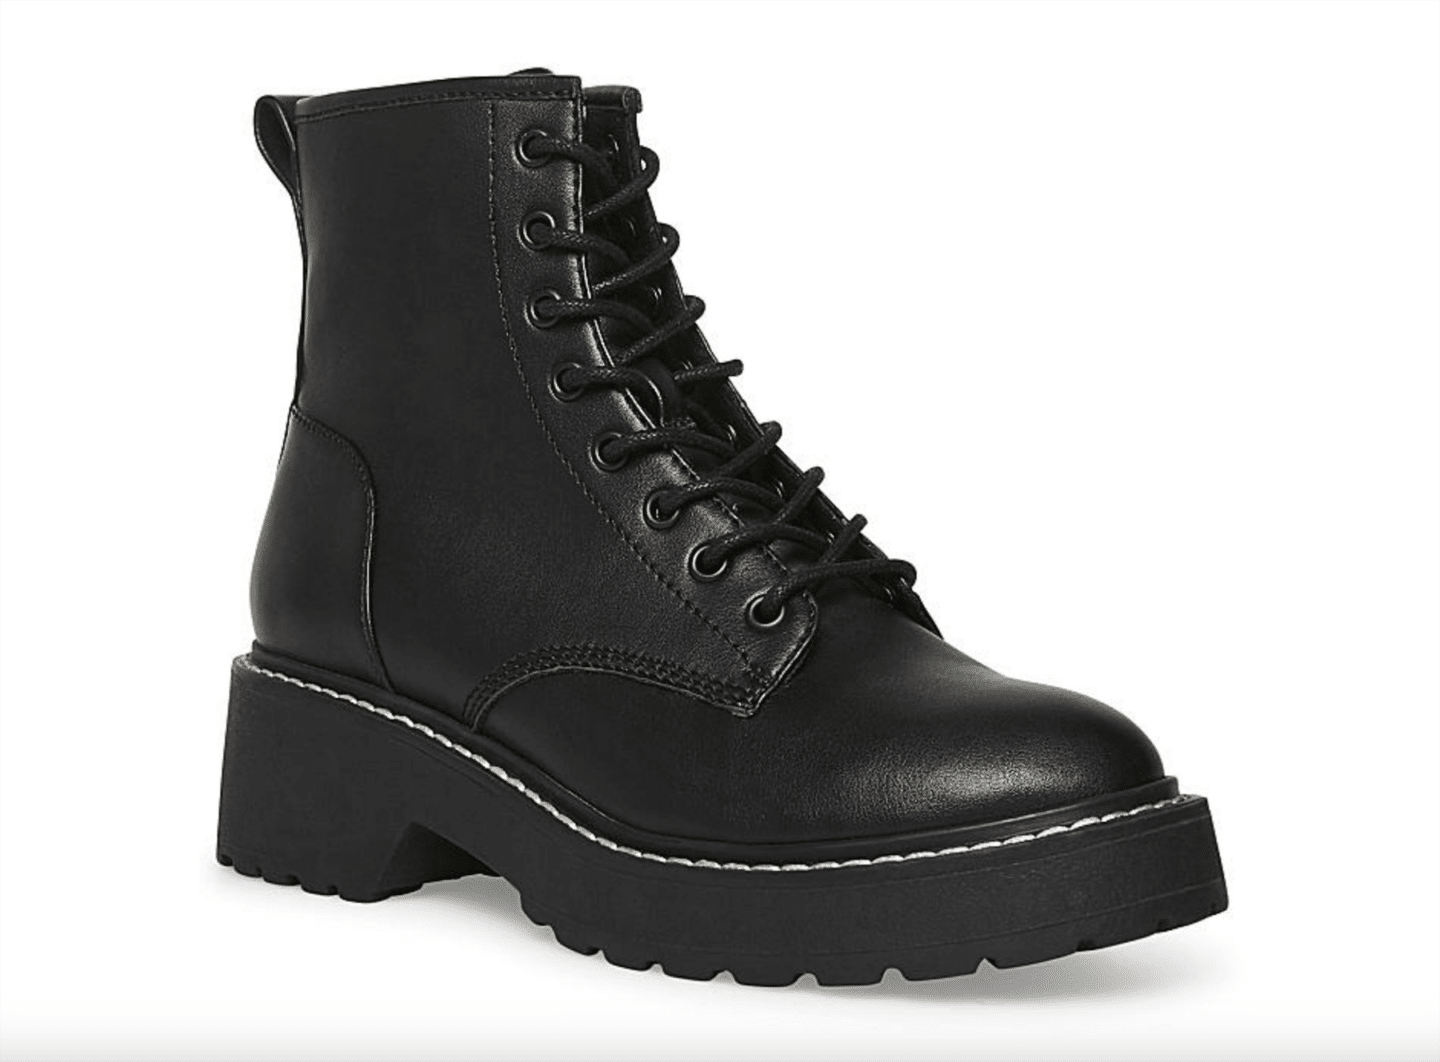 Top Doc Marten dupes, by fashion blogger What The Fab